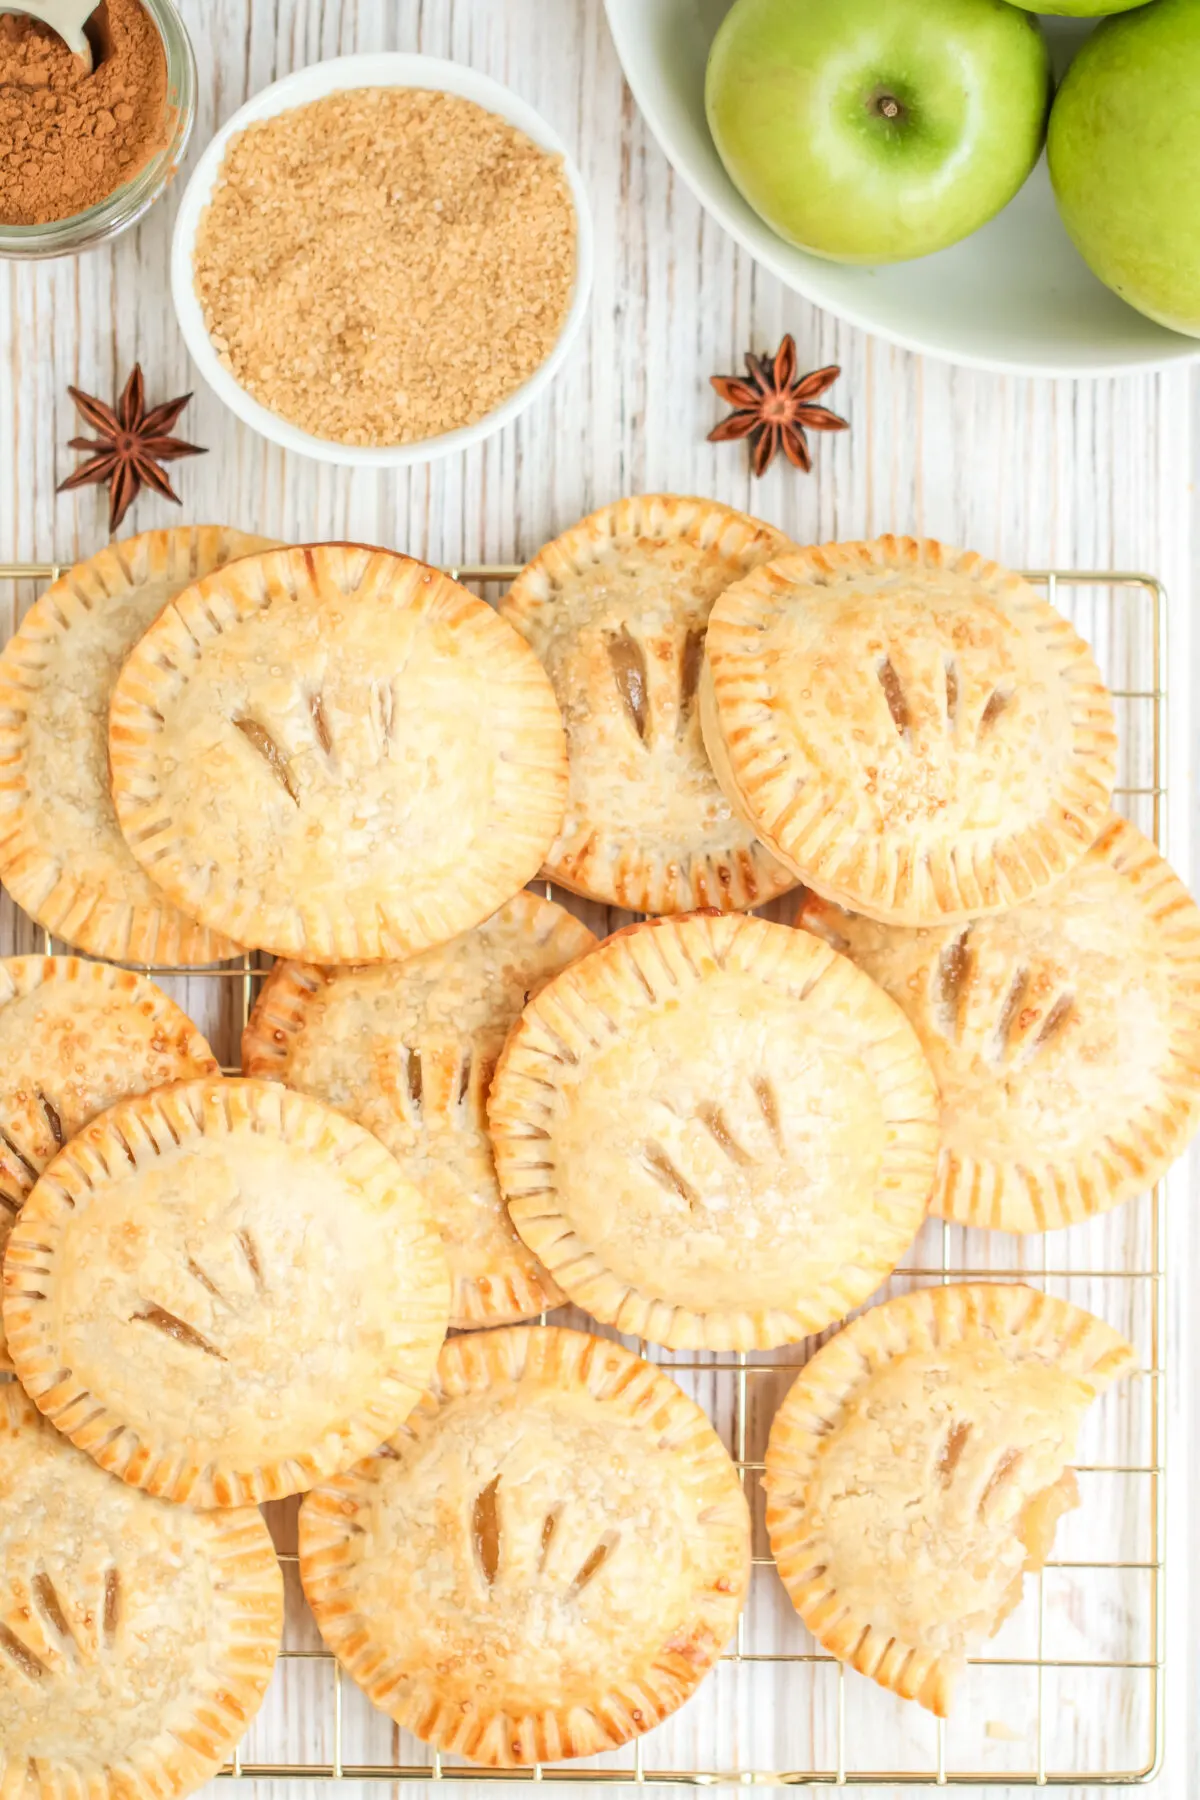 This delicious recipe for apple hand pies is perfect for autumn! These handheld pies are easy to make and perfect for a quick snack or dessert.